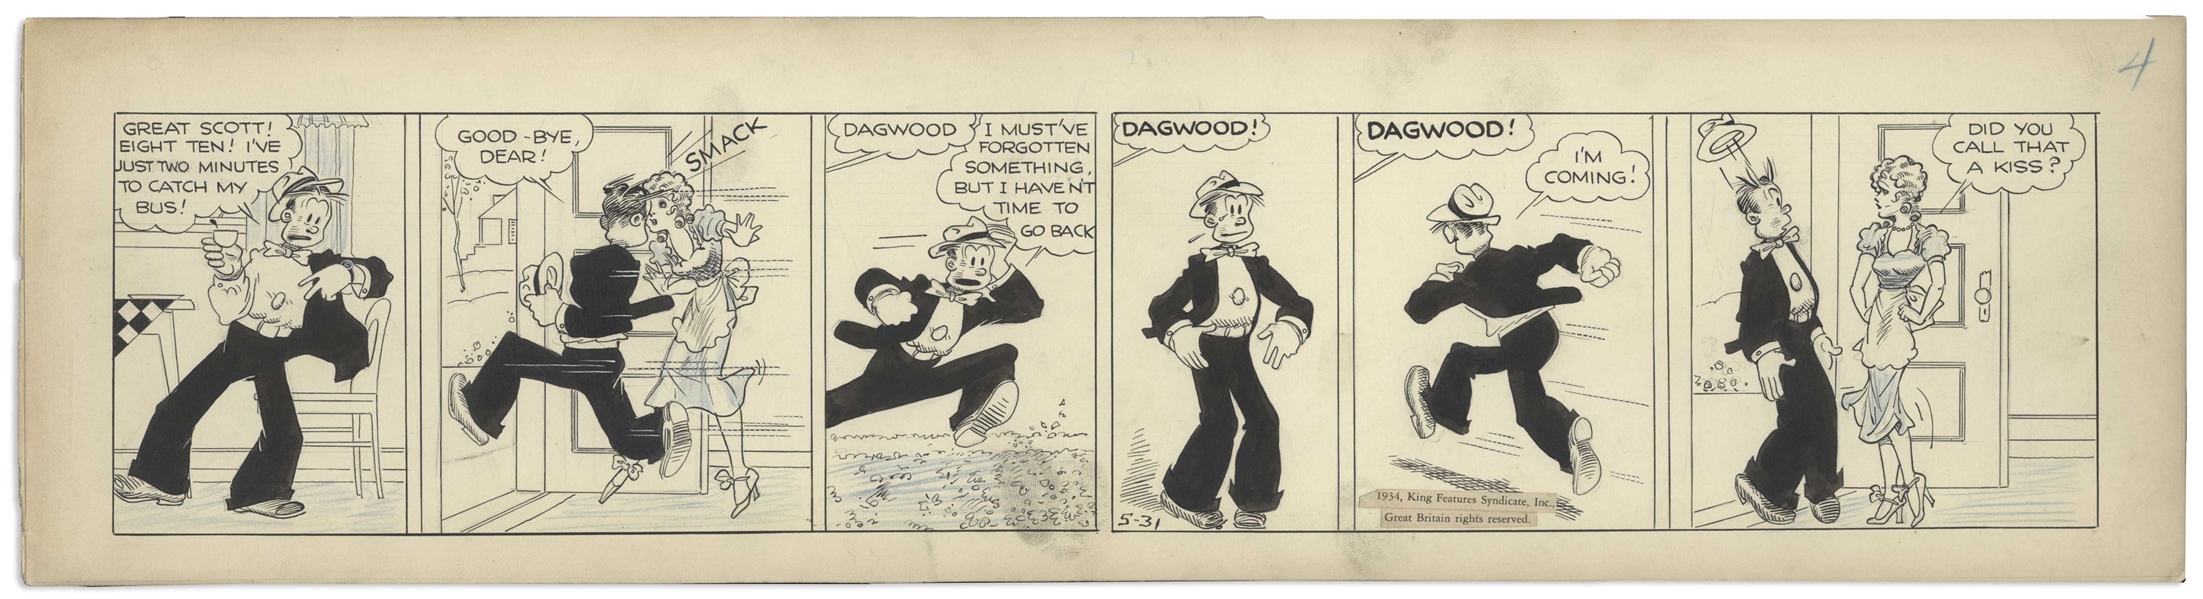 Chic Young Hand-Drawn ''Blondie'' Comic Strip From 1934 Titled ''Hen-'Pecked''' -- Dagwood Races Out the Door to Catch His Bus